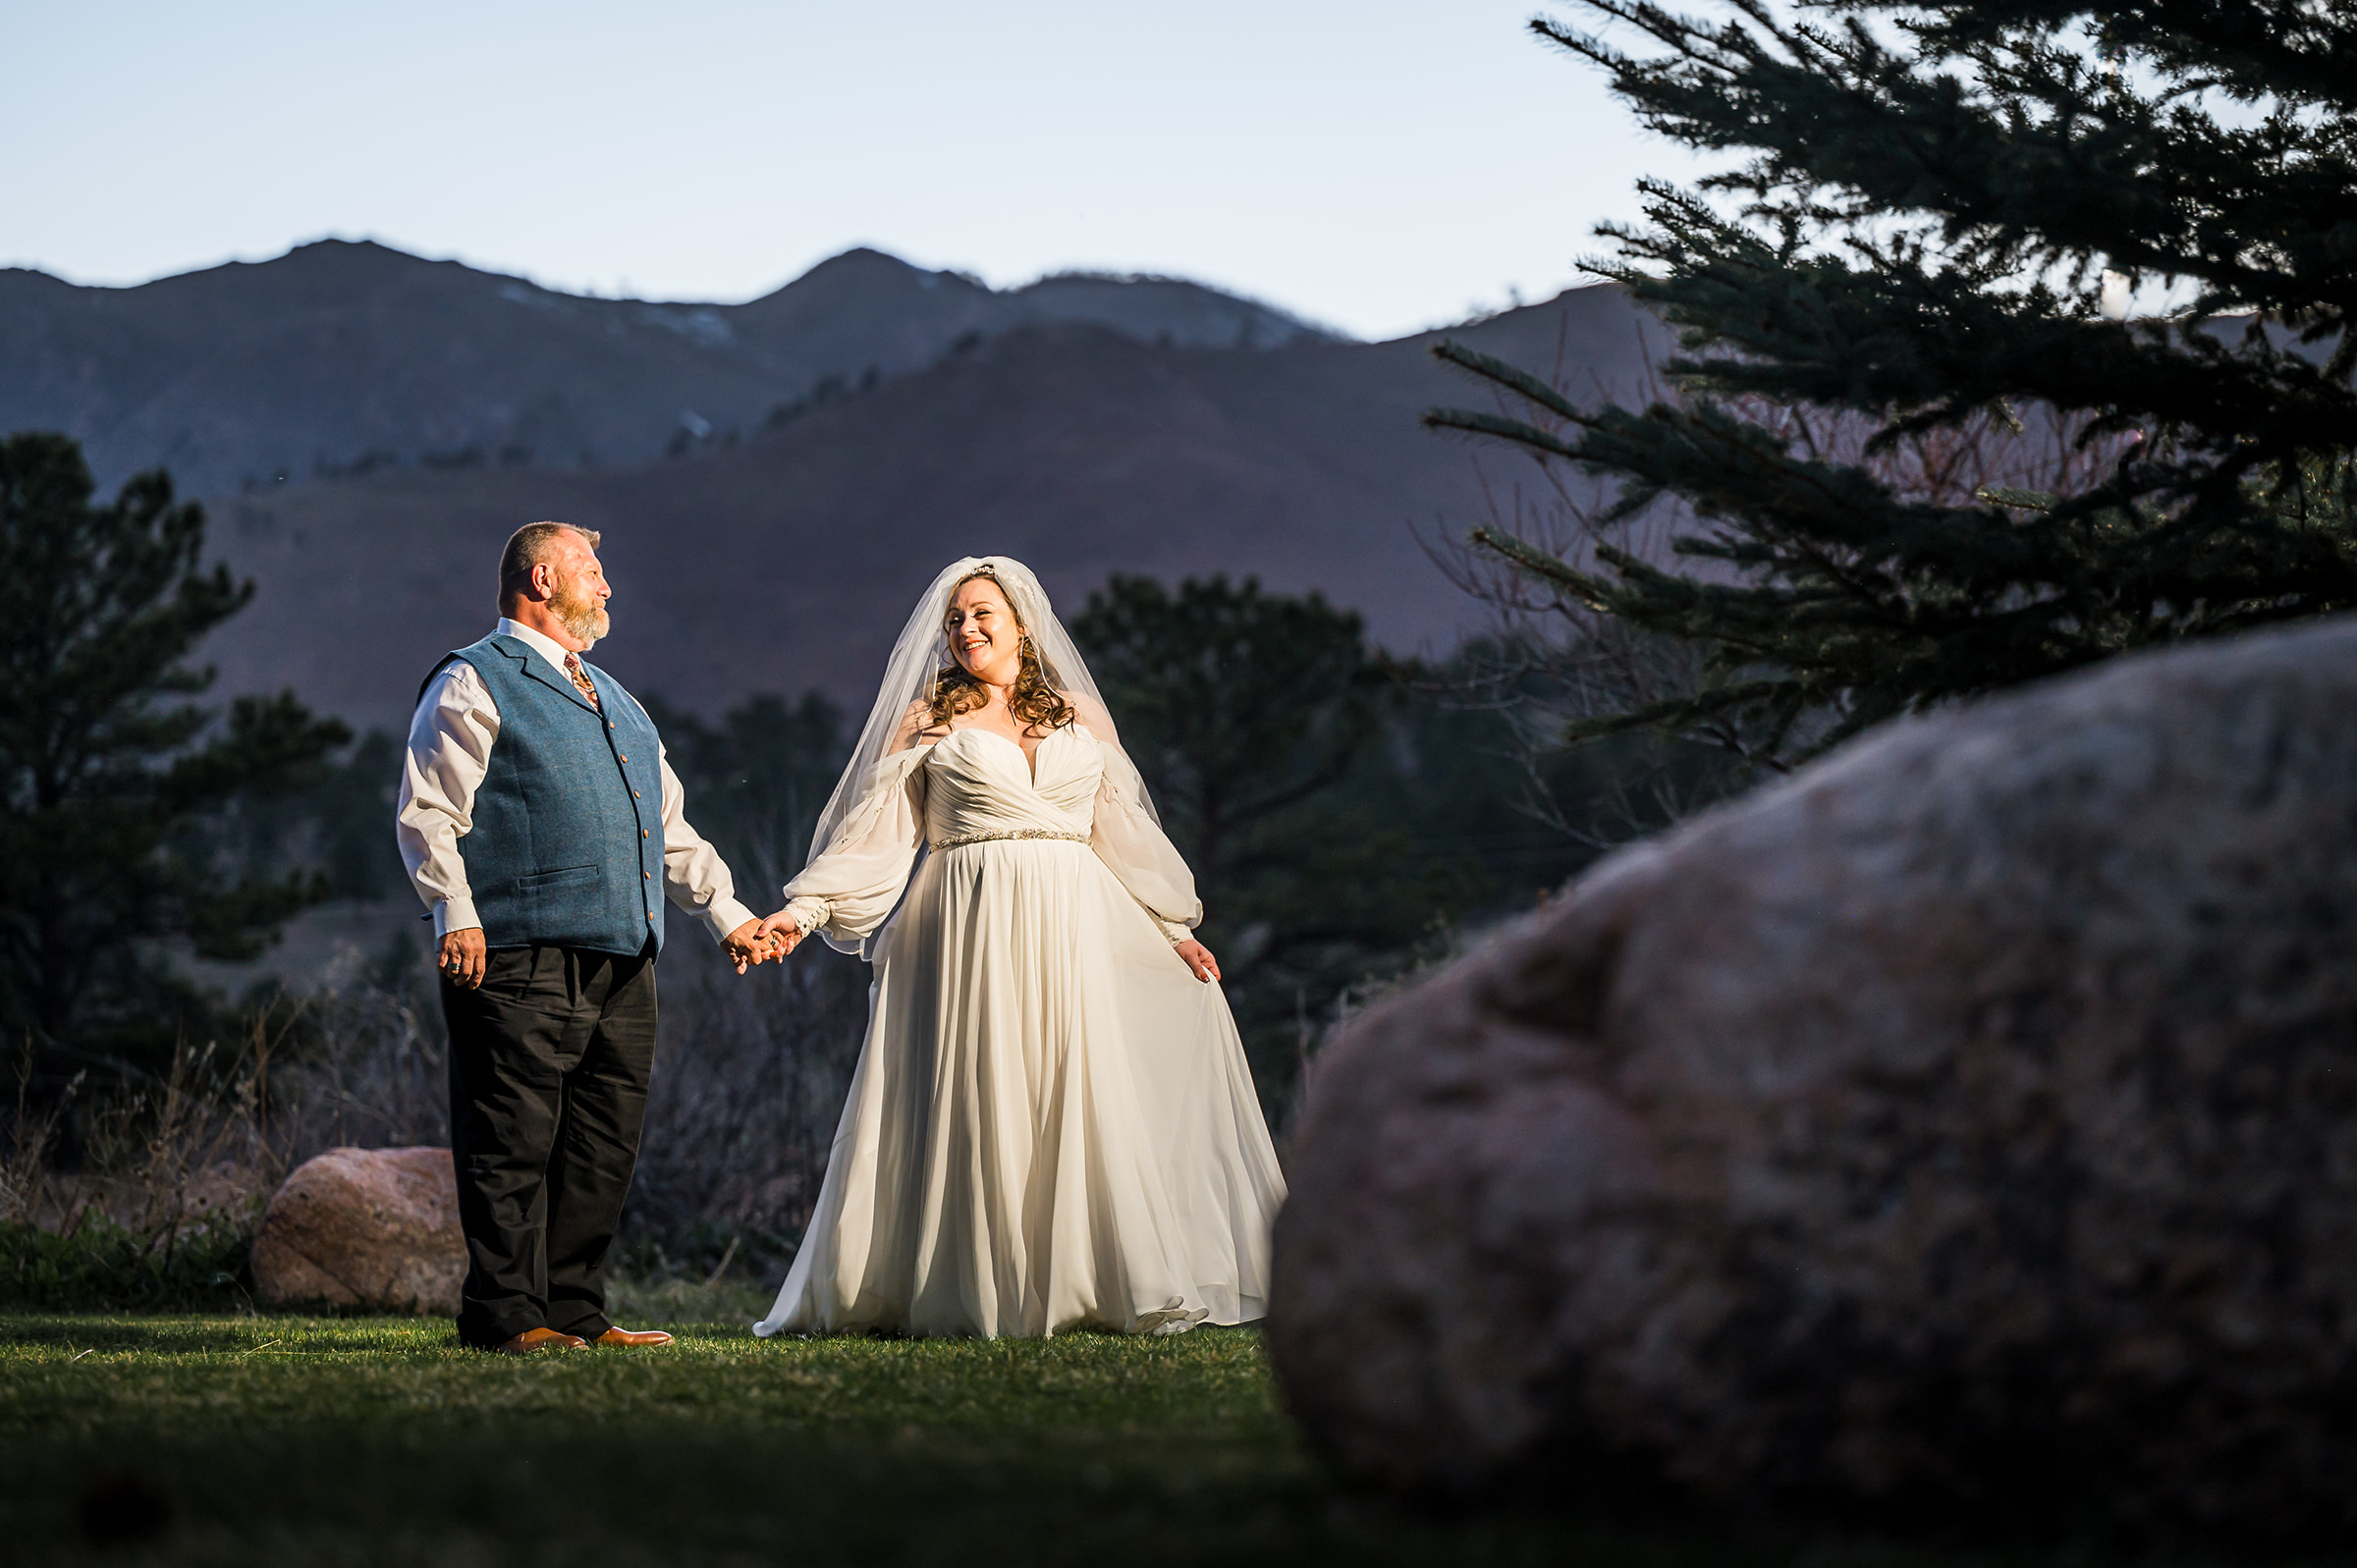 hand and hand walking looking at each other grass rocks mountain blue hour wedding couple photography denver colorado 